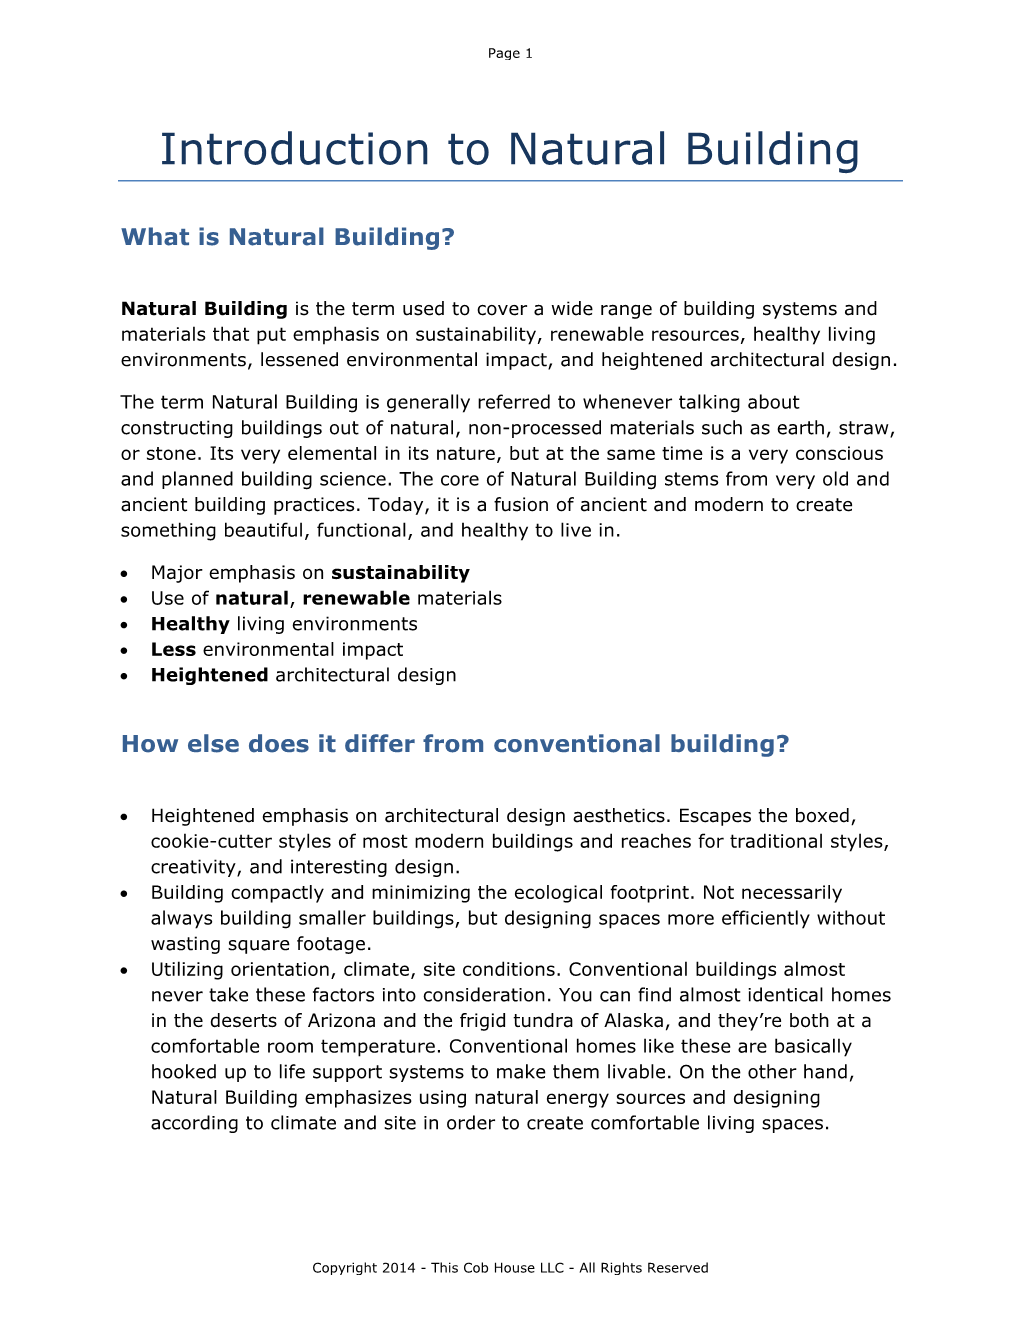 Introduction to Natural Building